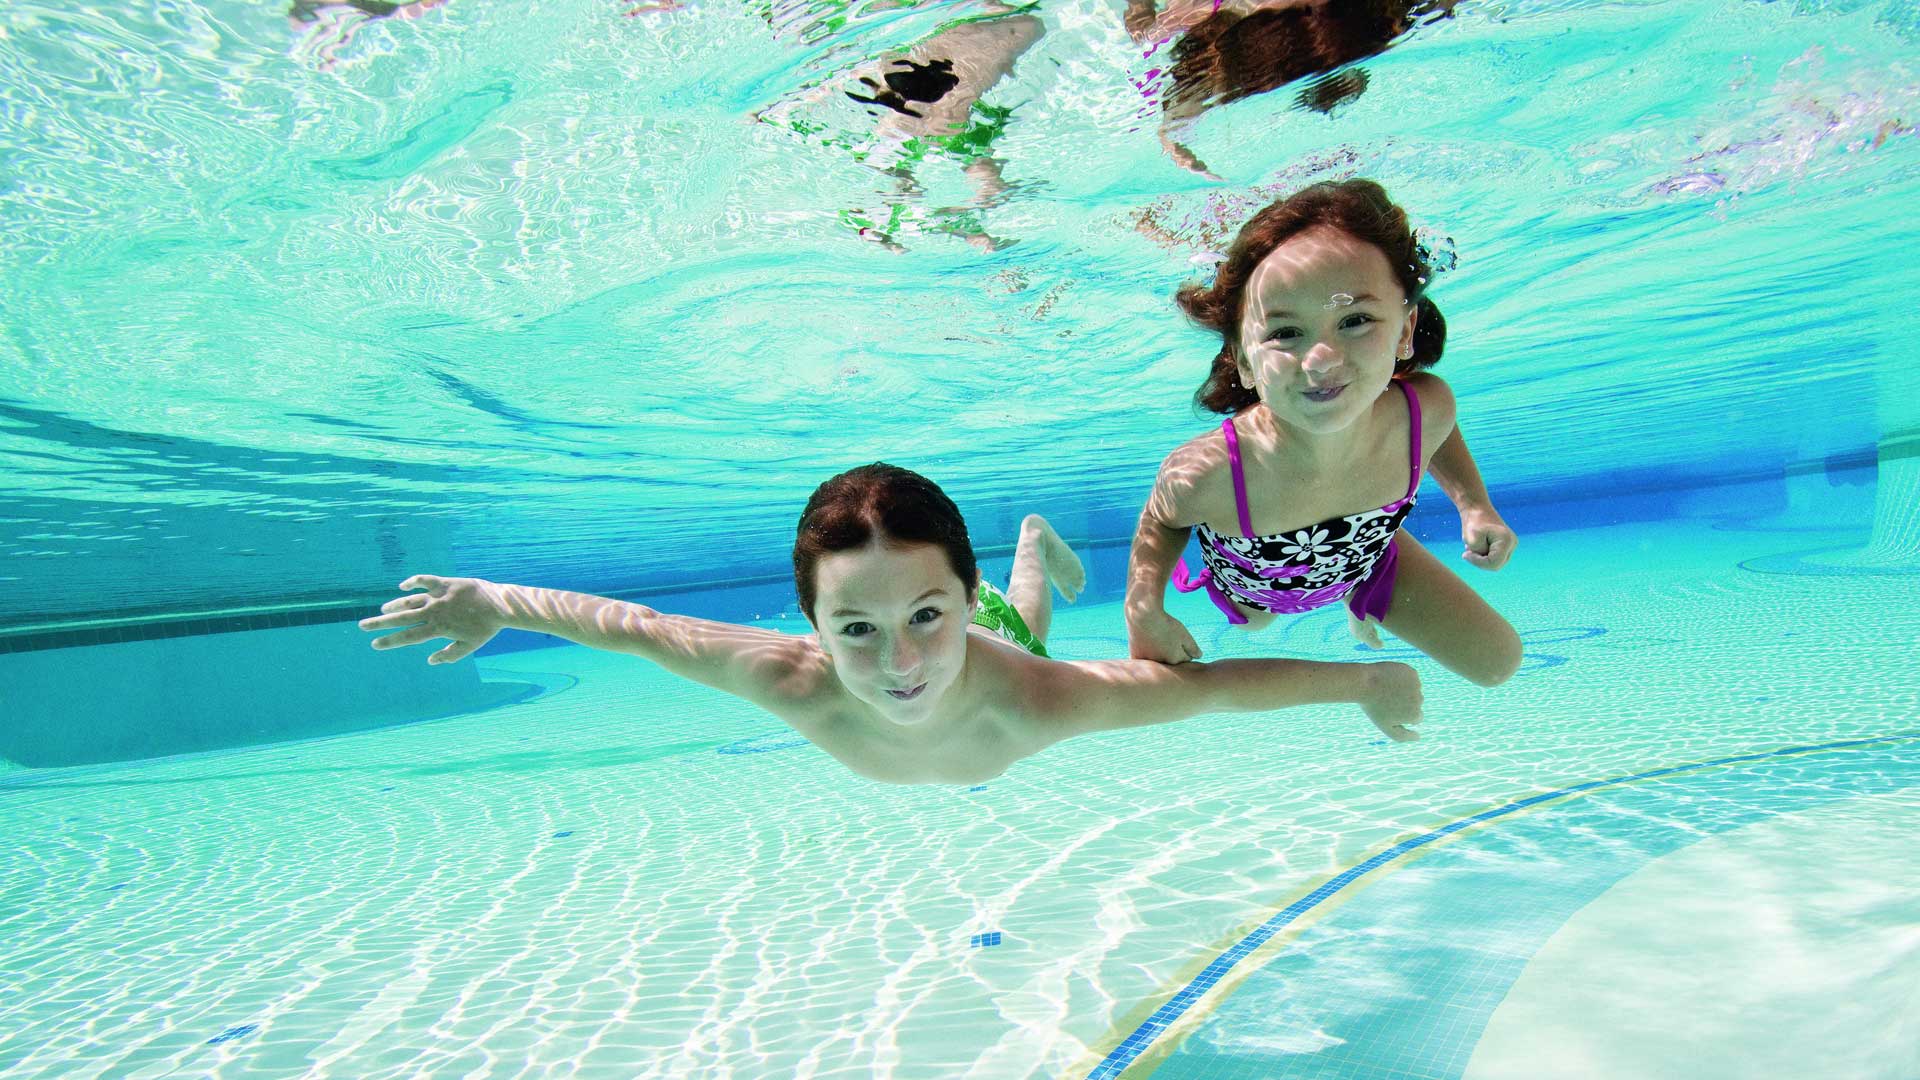 A Reminder About Pool Safety For Parents And Children - The Alvarez ...